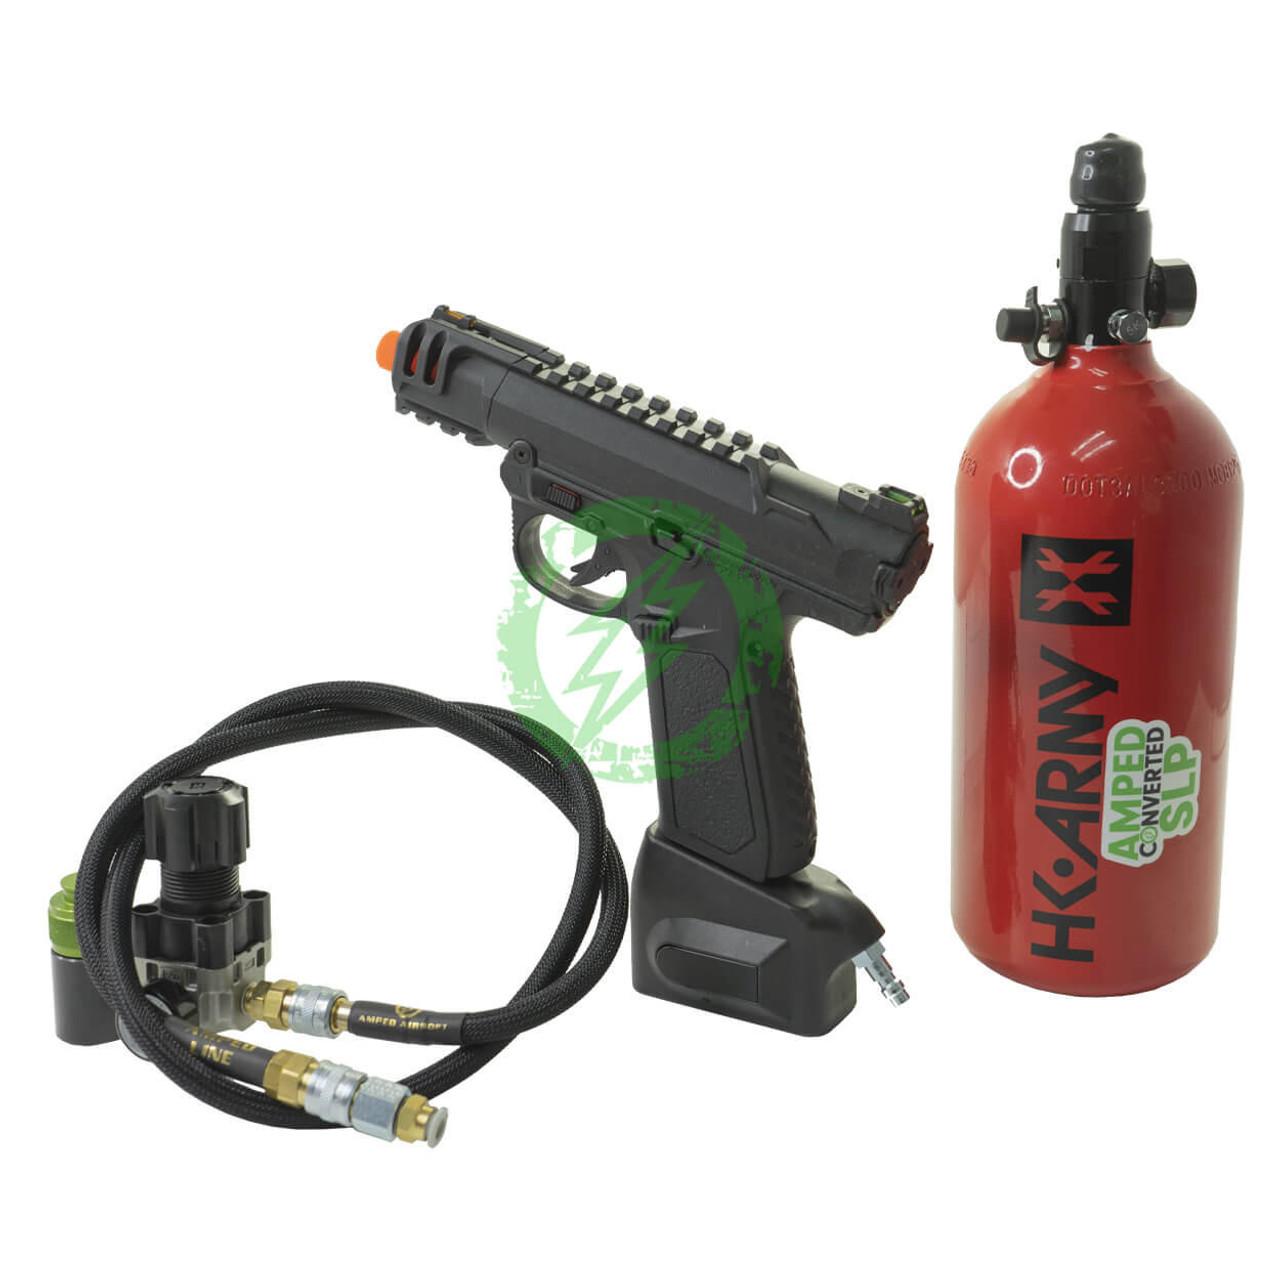 Amped Airsoft Amped Custom AAP-01 HPA Pistol Starter Kit | AAP-01, Adapter, Tank & Air Rig 